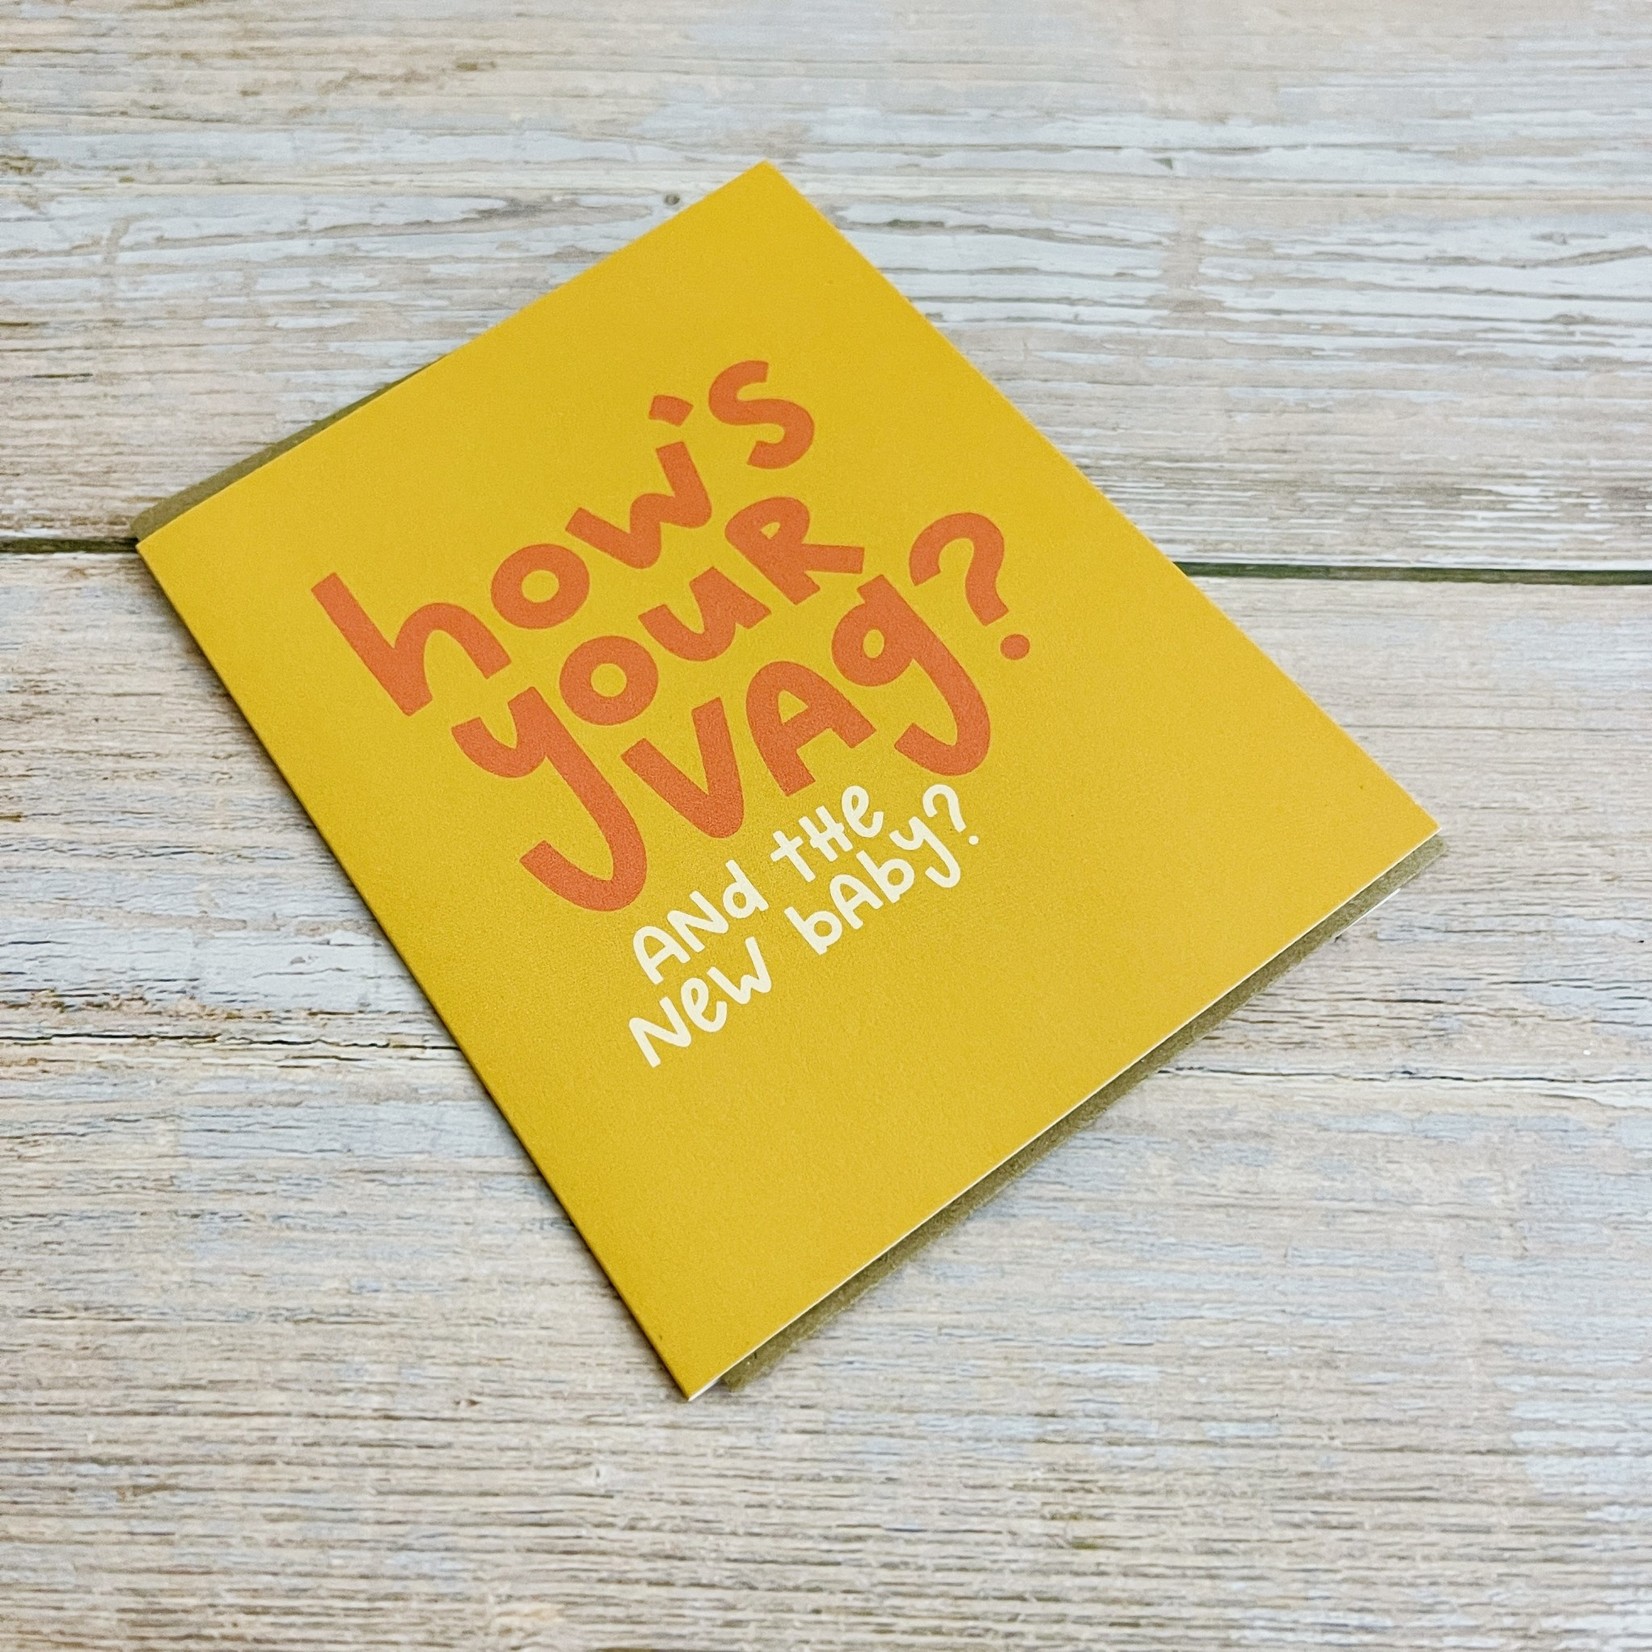 Twentysome Design Hows Your Vag? New Baby Card DNO